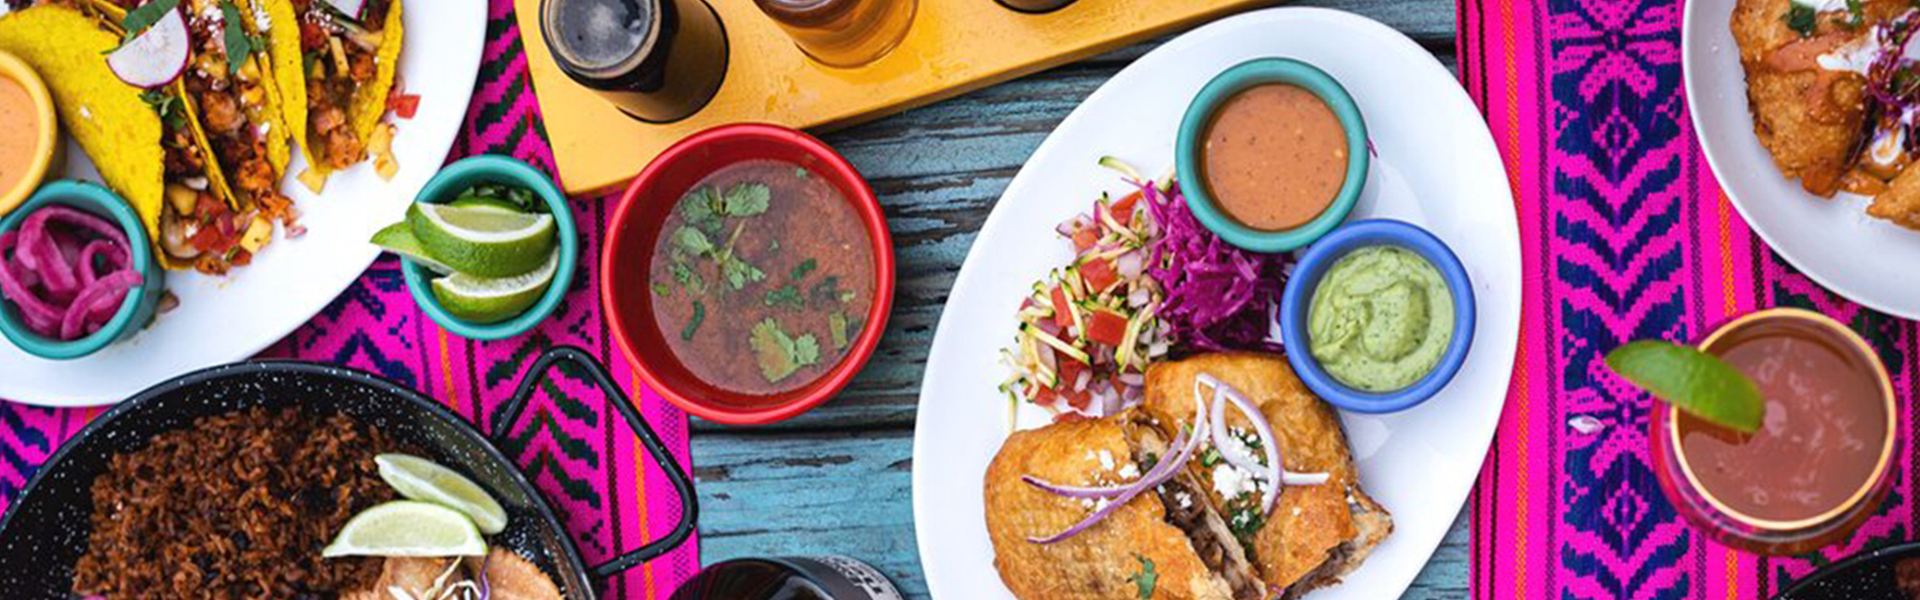 table with a colorful spread of hispanic food, photo by Joel Bahena